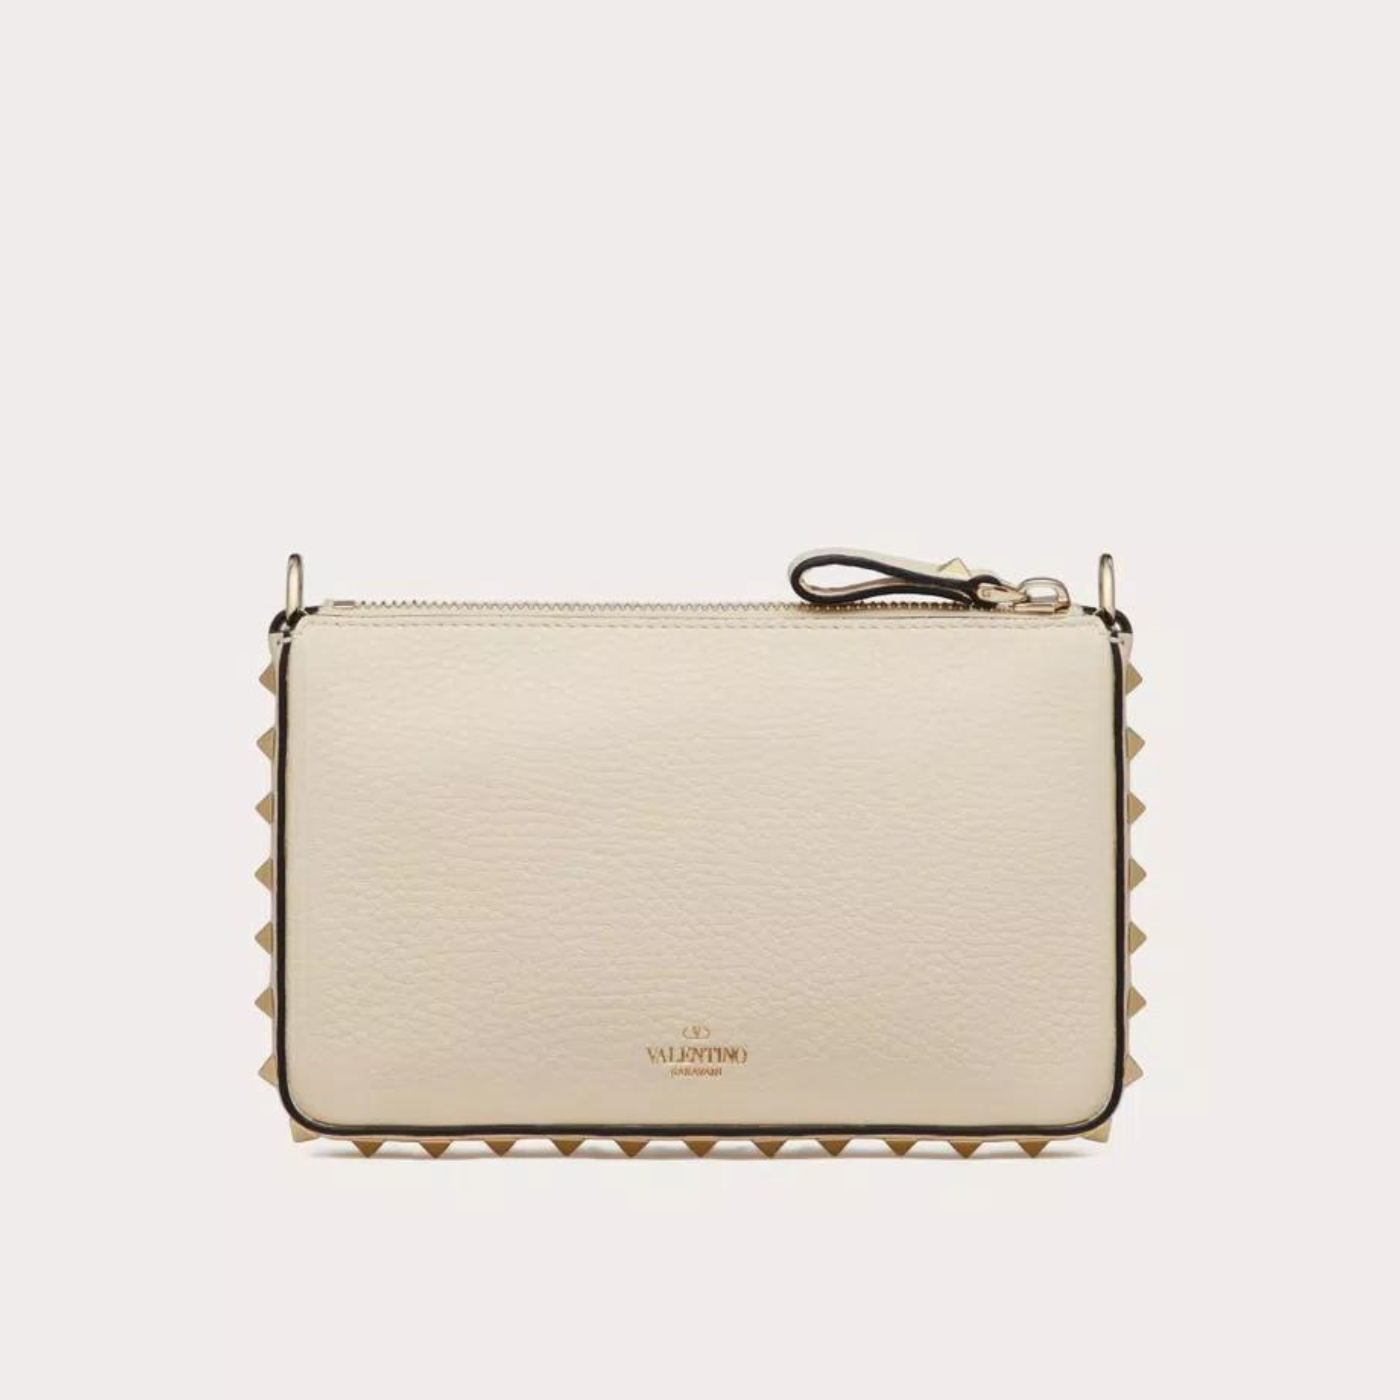 Rockstud Pouch with Chain in Ivory Handbags VALENTINO - LOLAMIR